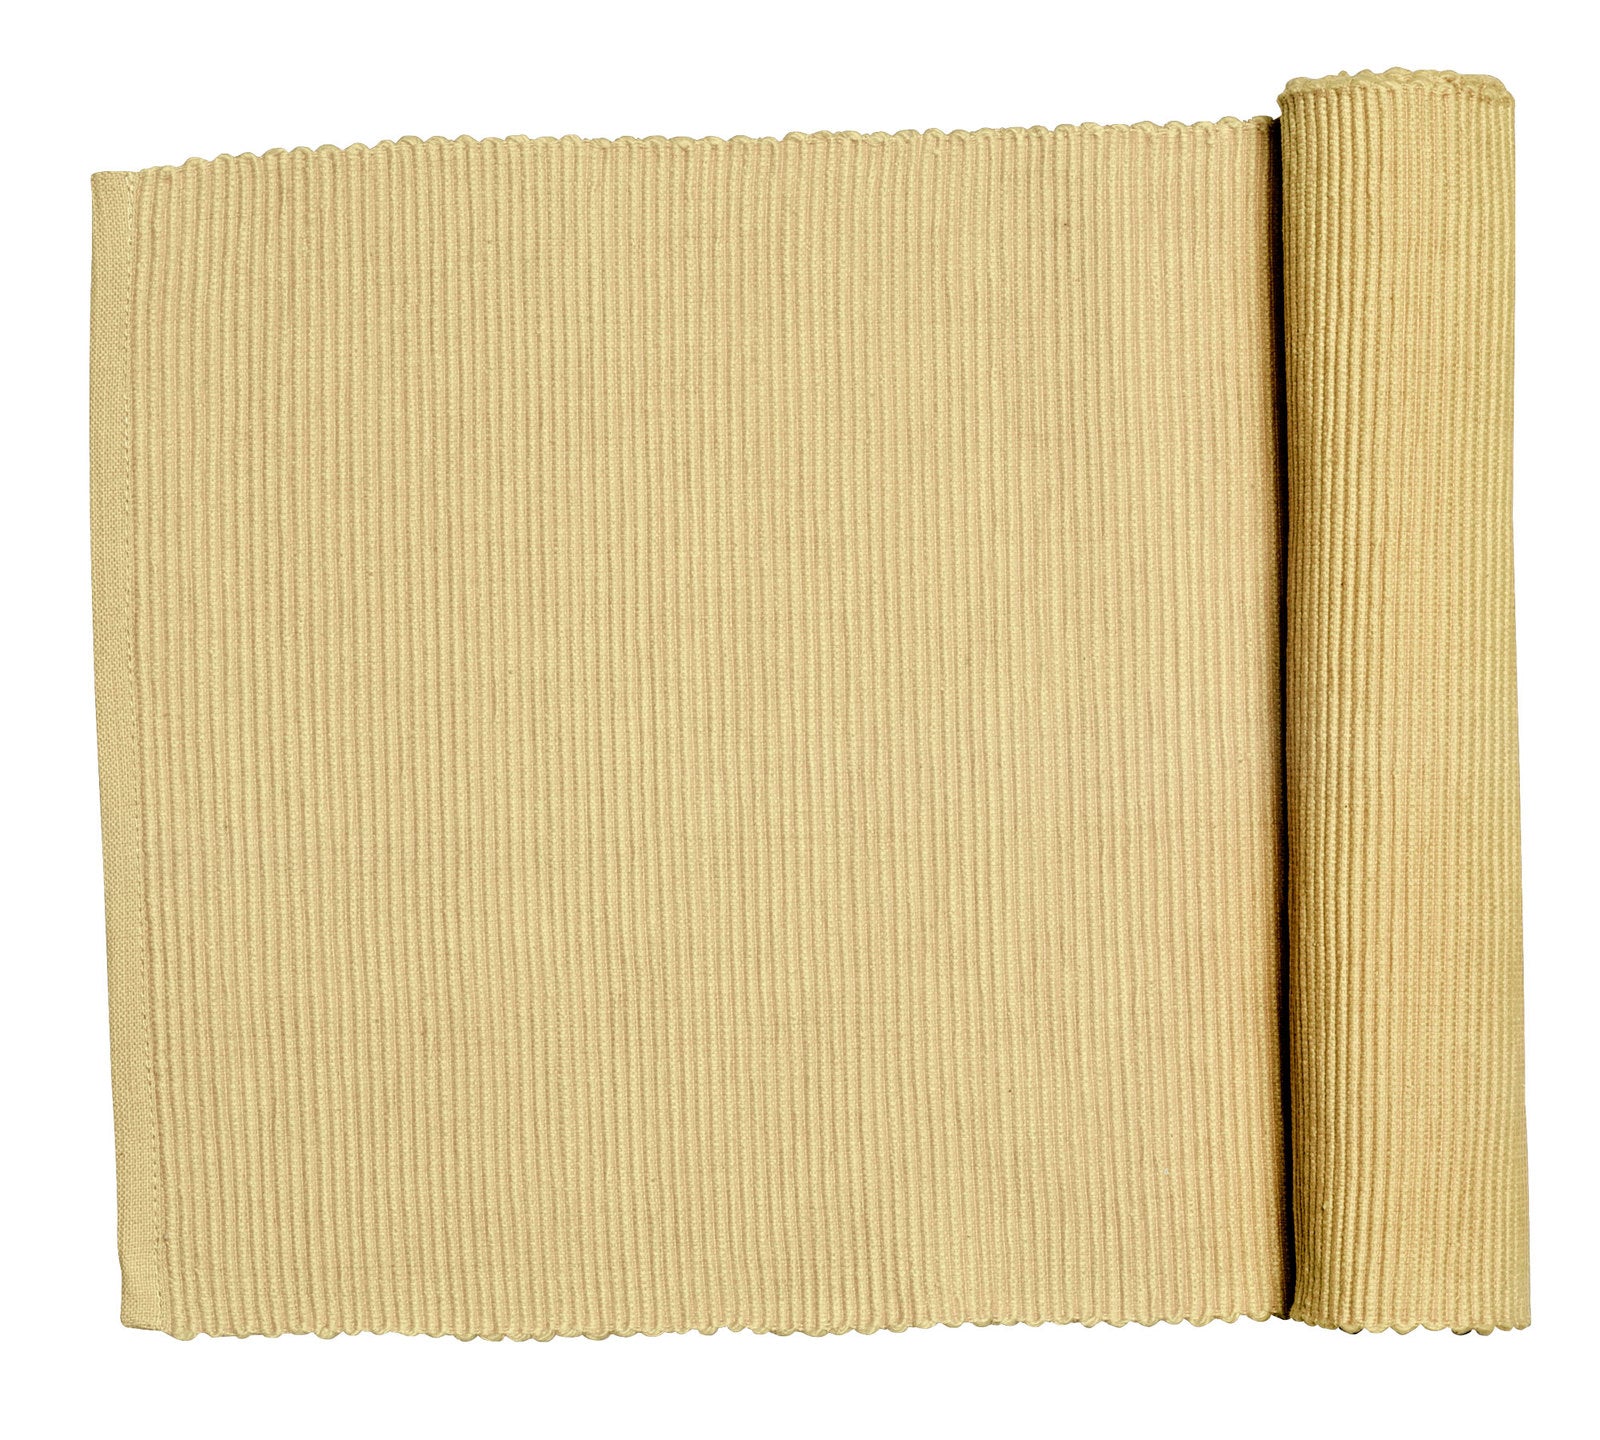 Lollipop Ribbed Runner - 33 cm x 135 cm in Taupe